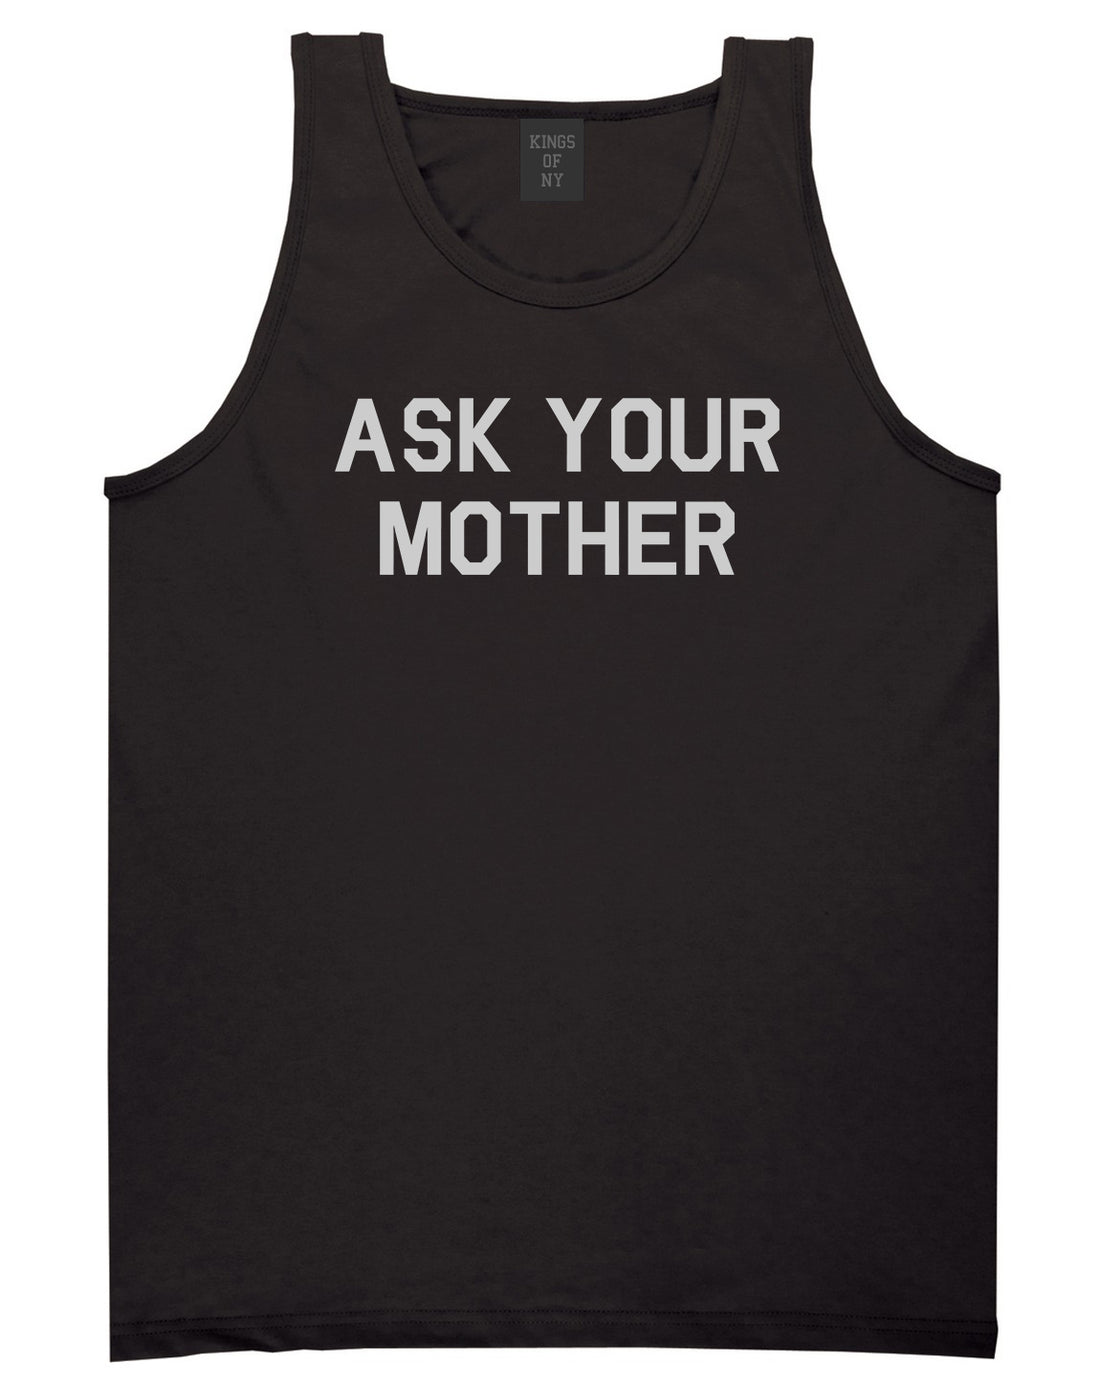 Ask Your Mother Funny Dad Mens Tank Top Shirt Black by Kings Of NY